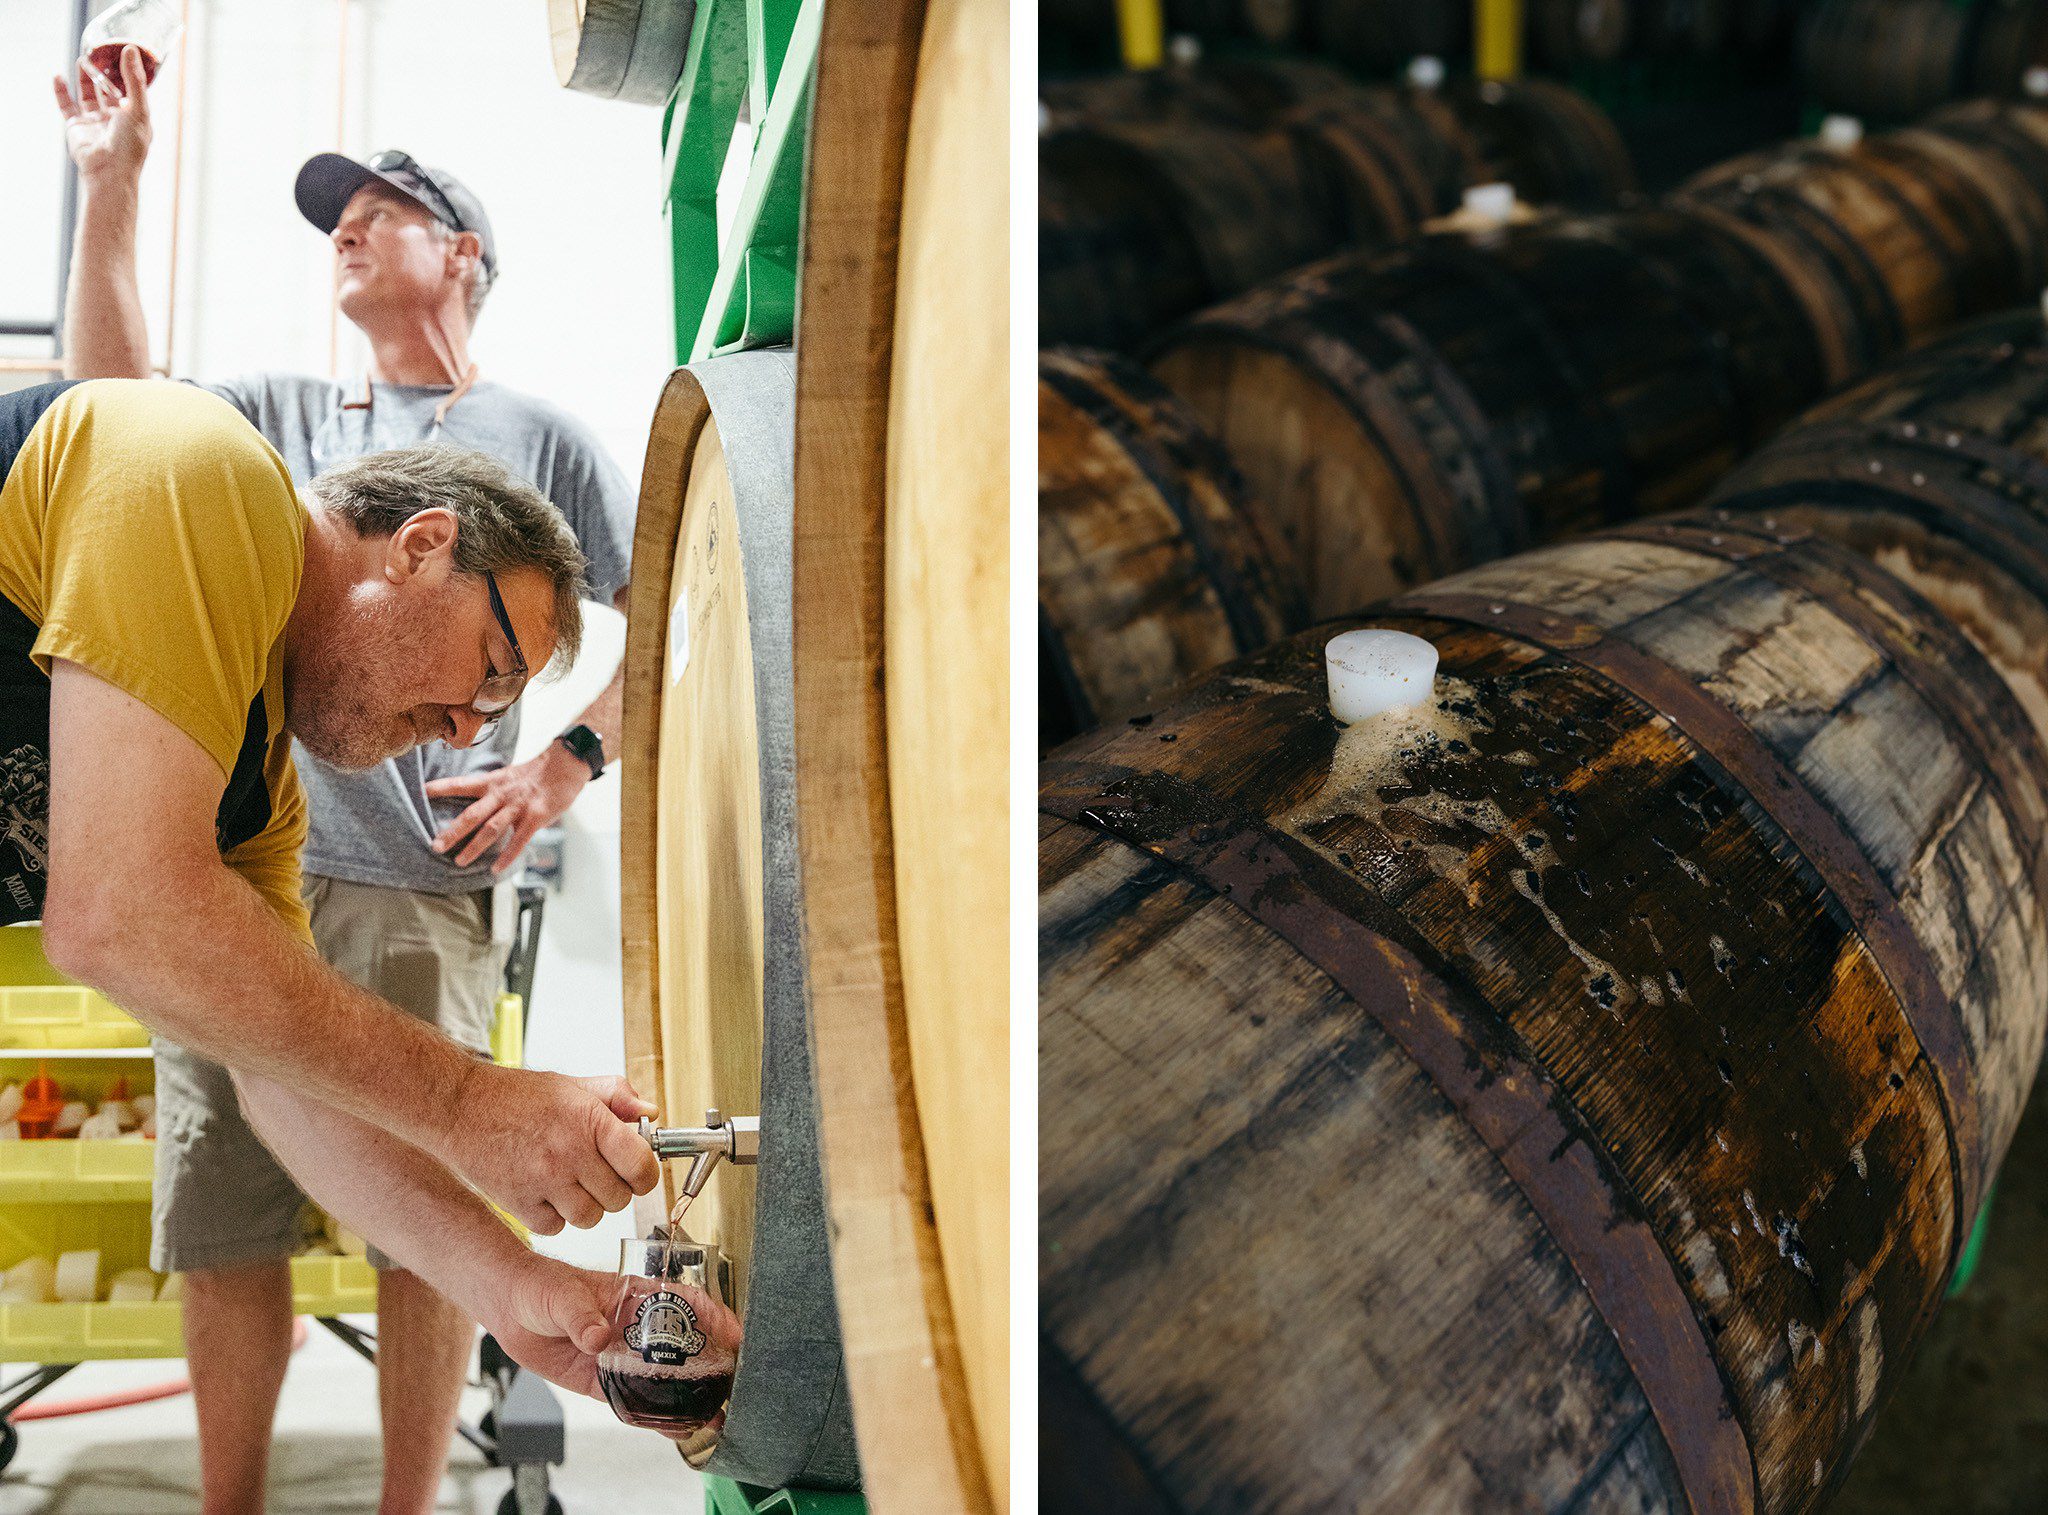 Two brewers pour barrel aged beer samples from wooden casks at Sierra Nevada Brewing Company